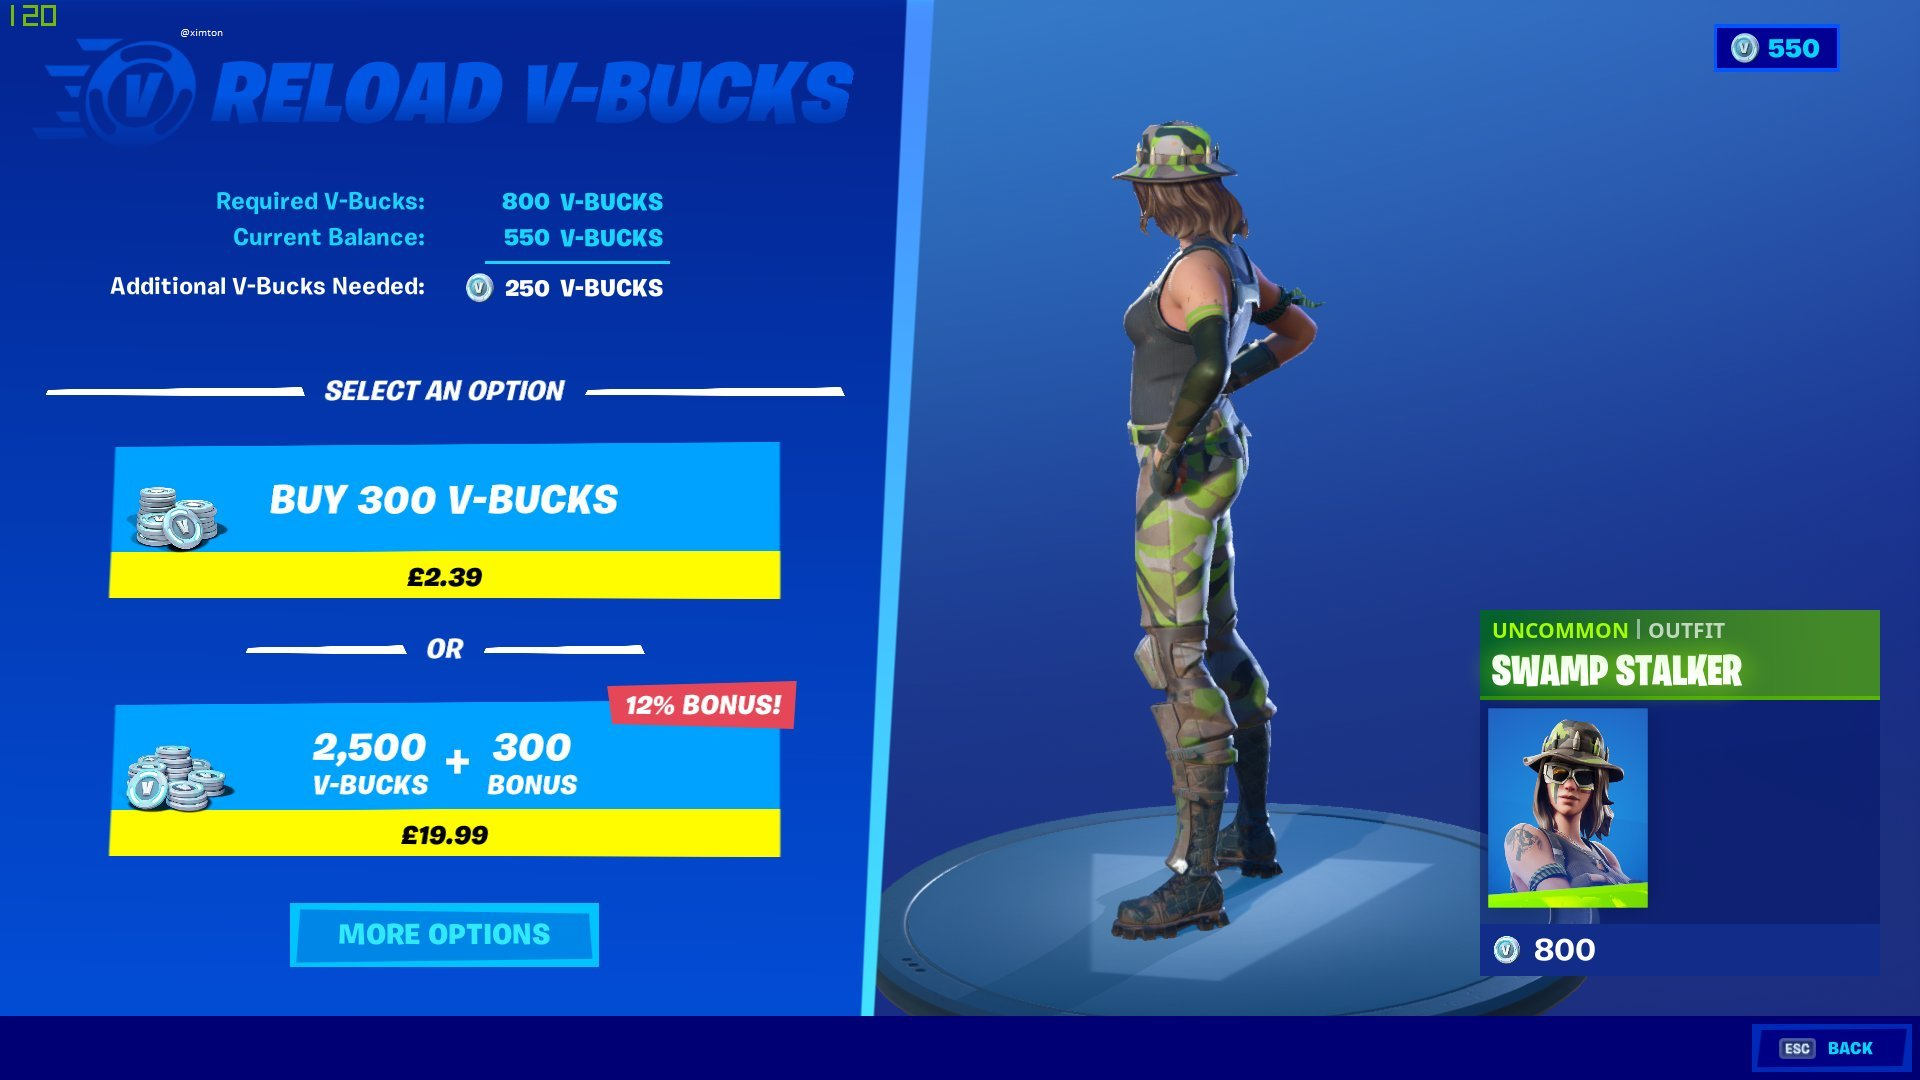 Reload V-Bucks feature enabled in Germany.